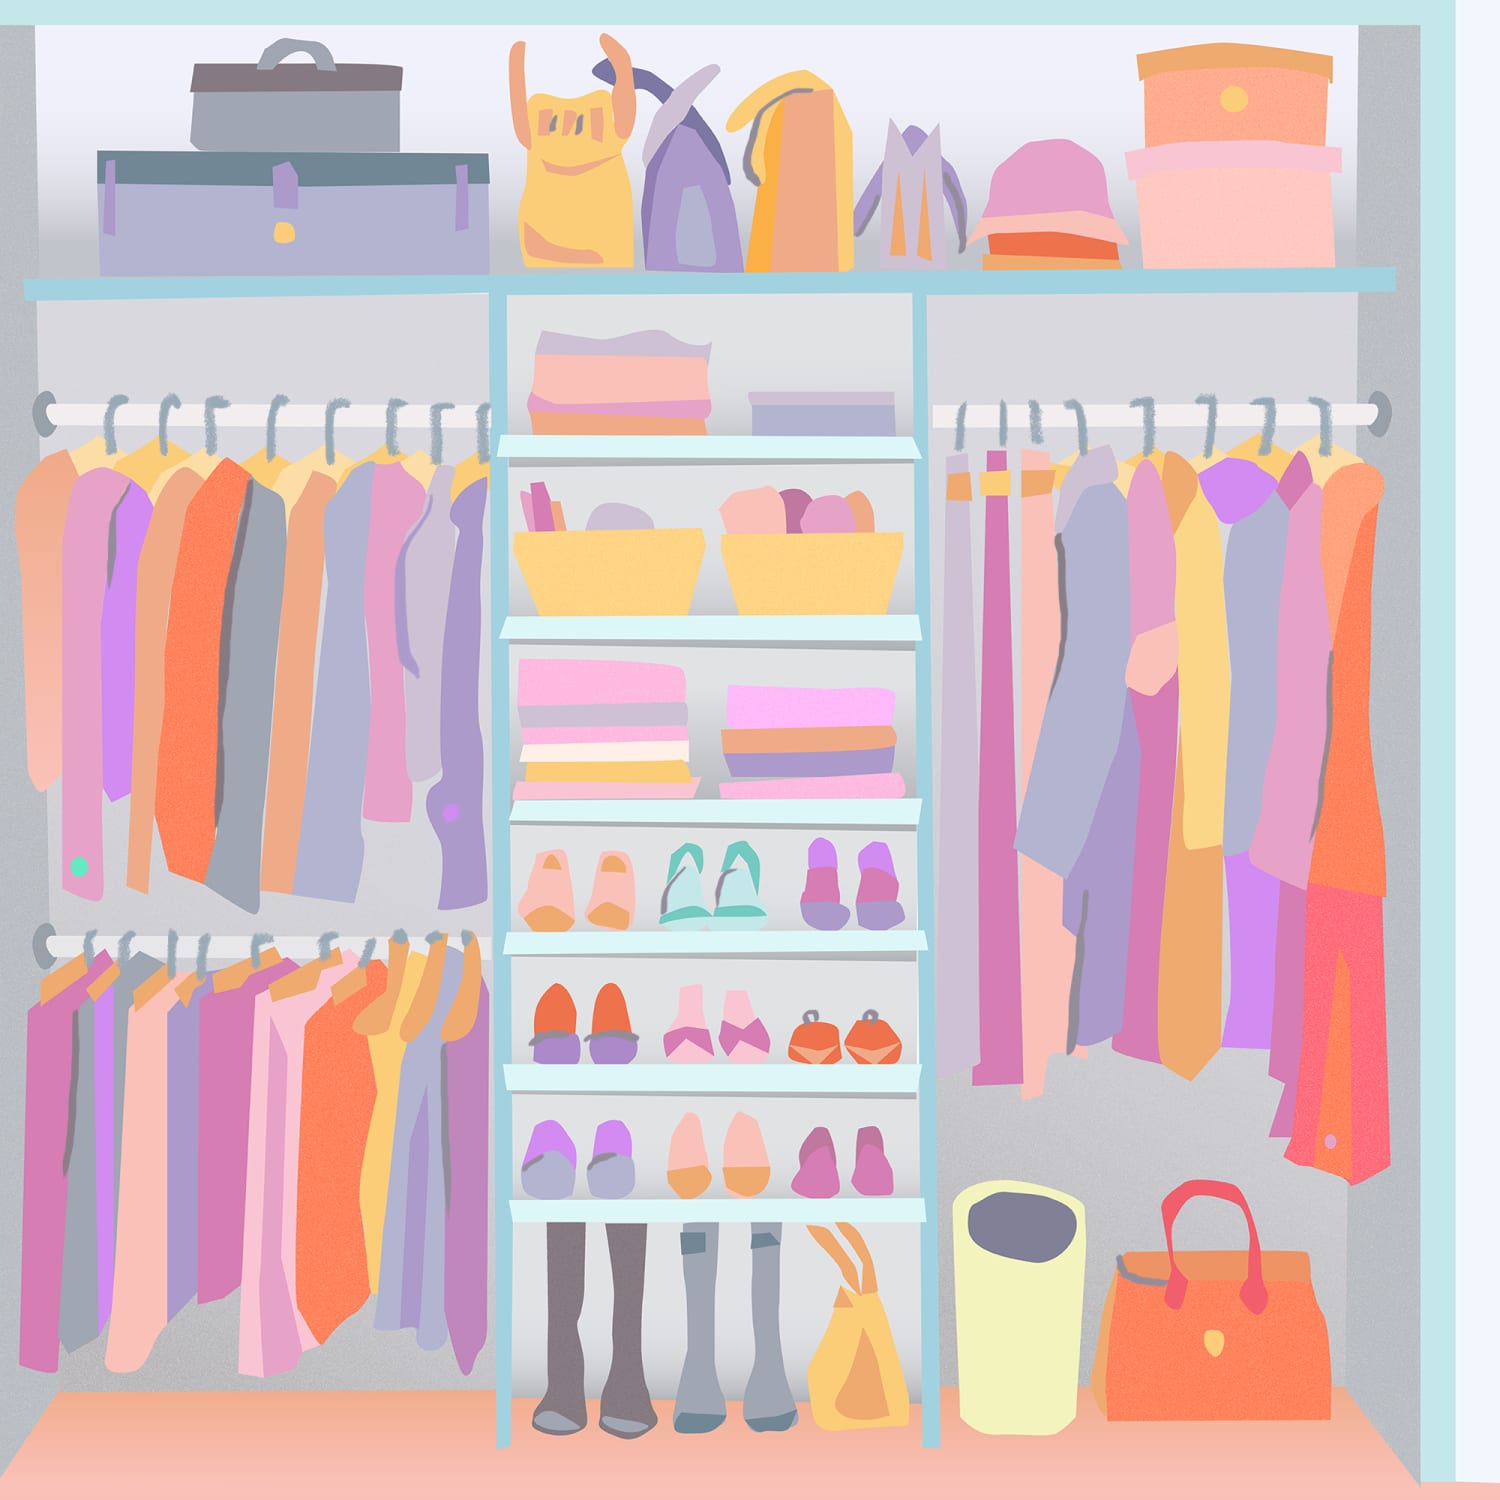 How To Organize And Sort Your Bedroom Closet